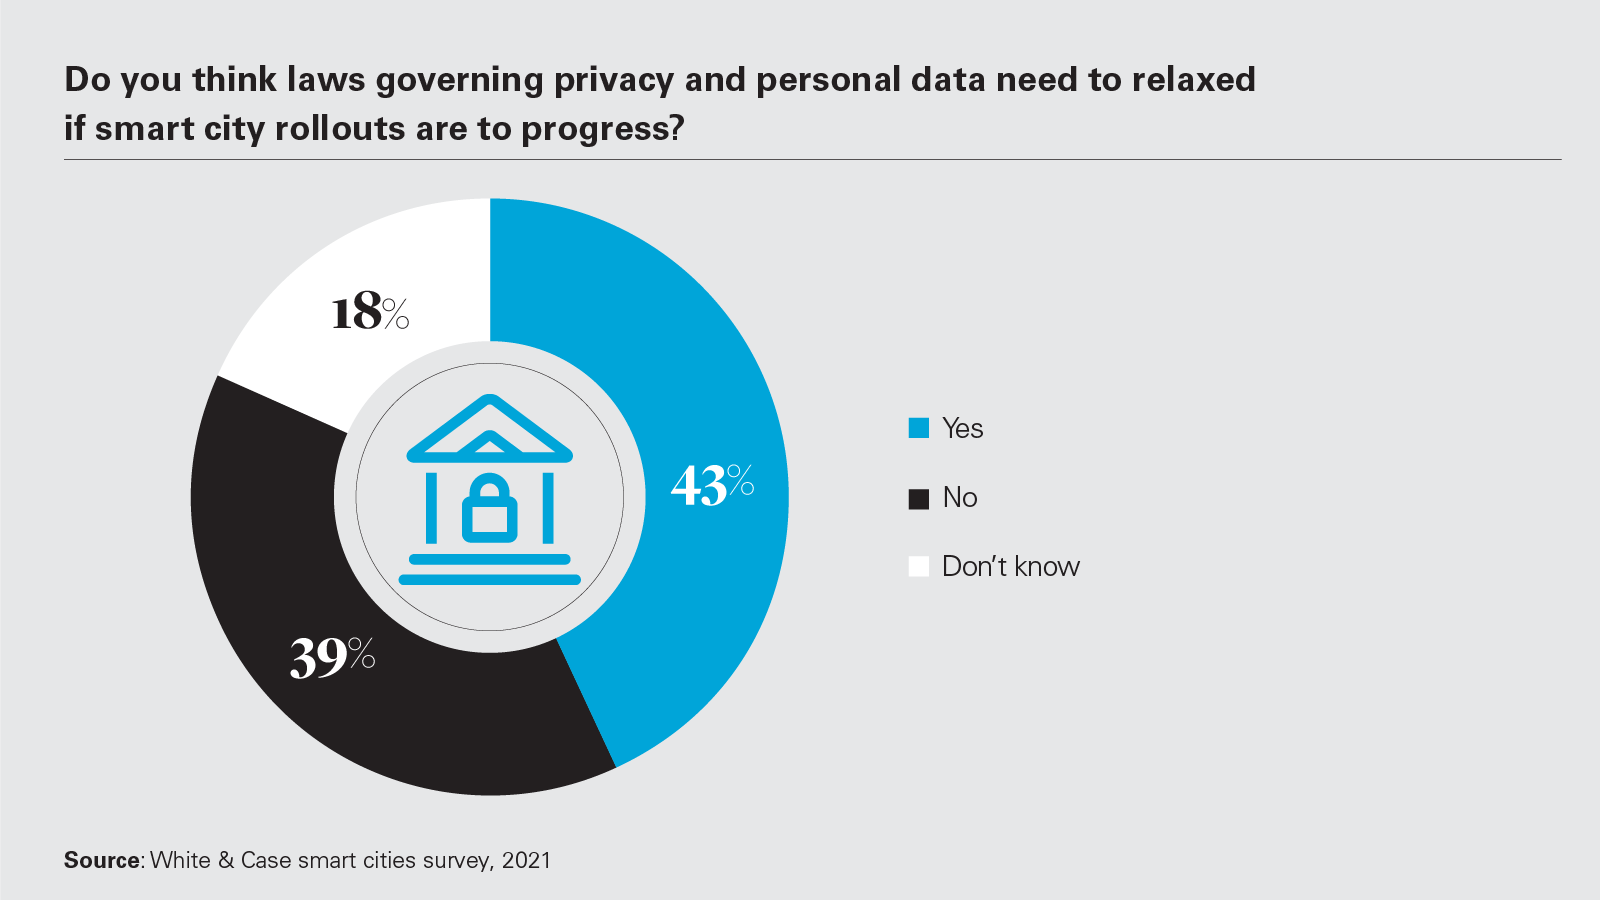 Do you think laws governing privacy and personal data need to relaxed if smart city rollouts are to progress? Yes